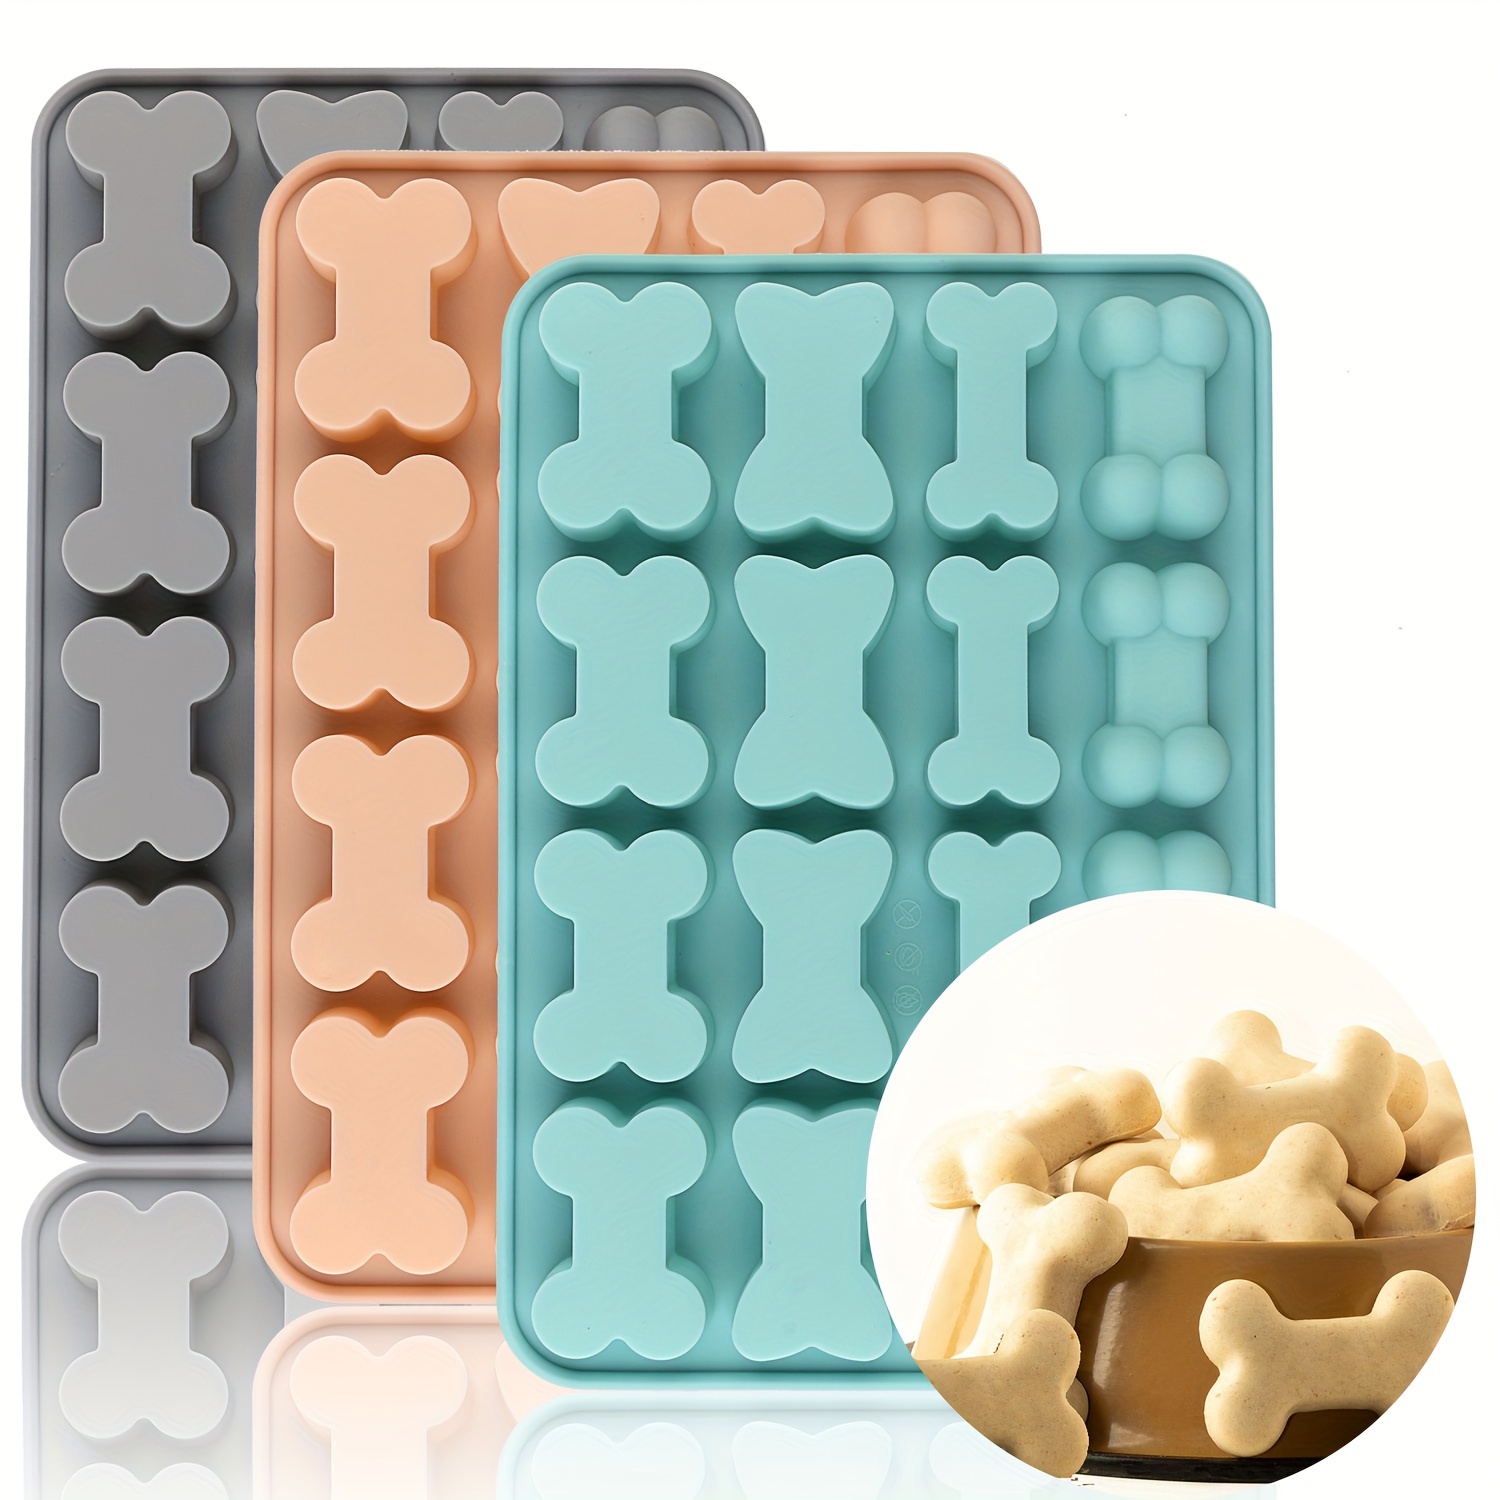 

Silicone Bone Mold Set: 16 Cavity, 4 Bone Shapes, Reusable, Non-stick, Suitable For Chocolate, Cake, Candy, Jelly, Ice, Pet Treat Toys - Christmas, Halloween, Easter, Hanukkah, Thanksgiving